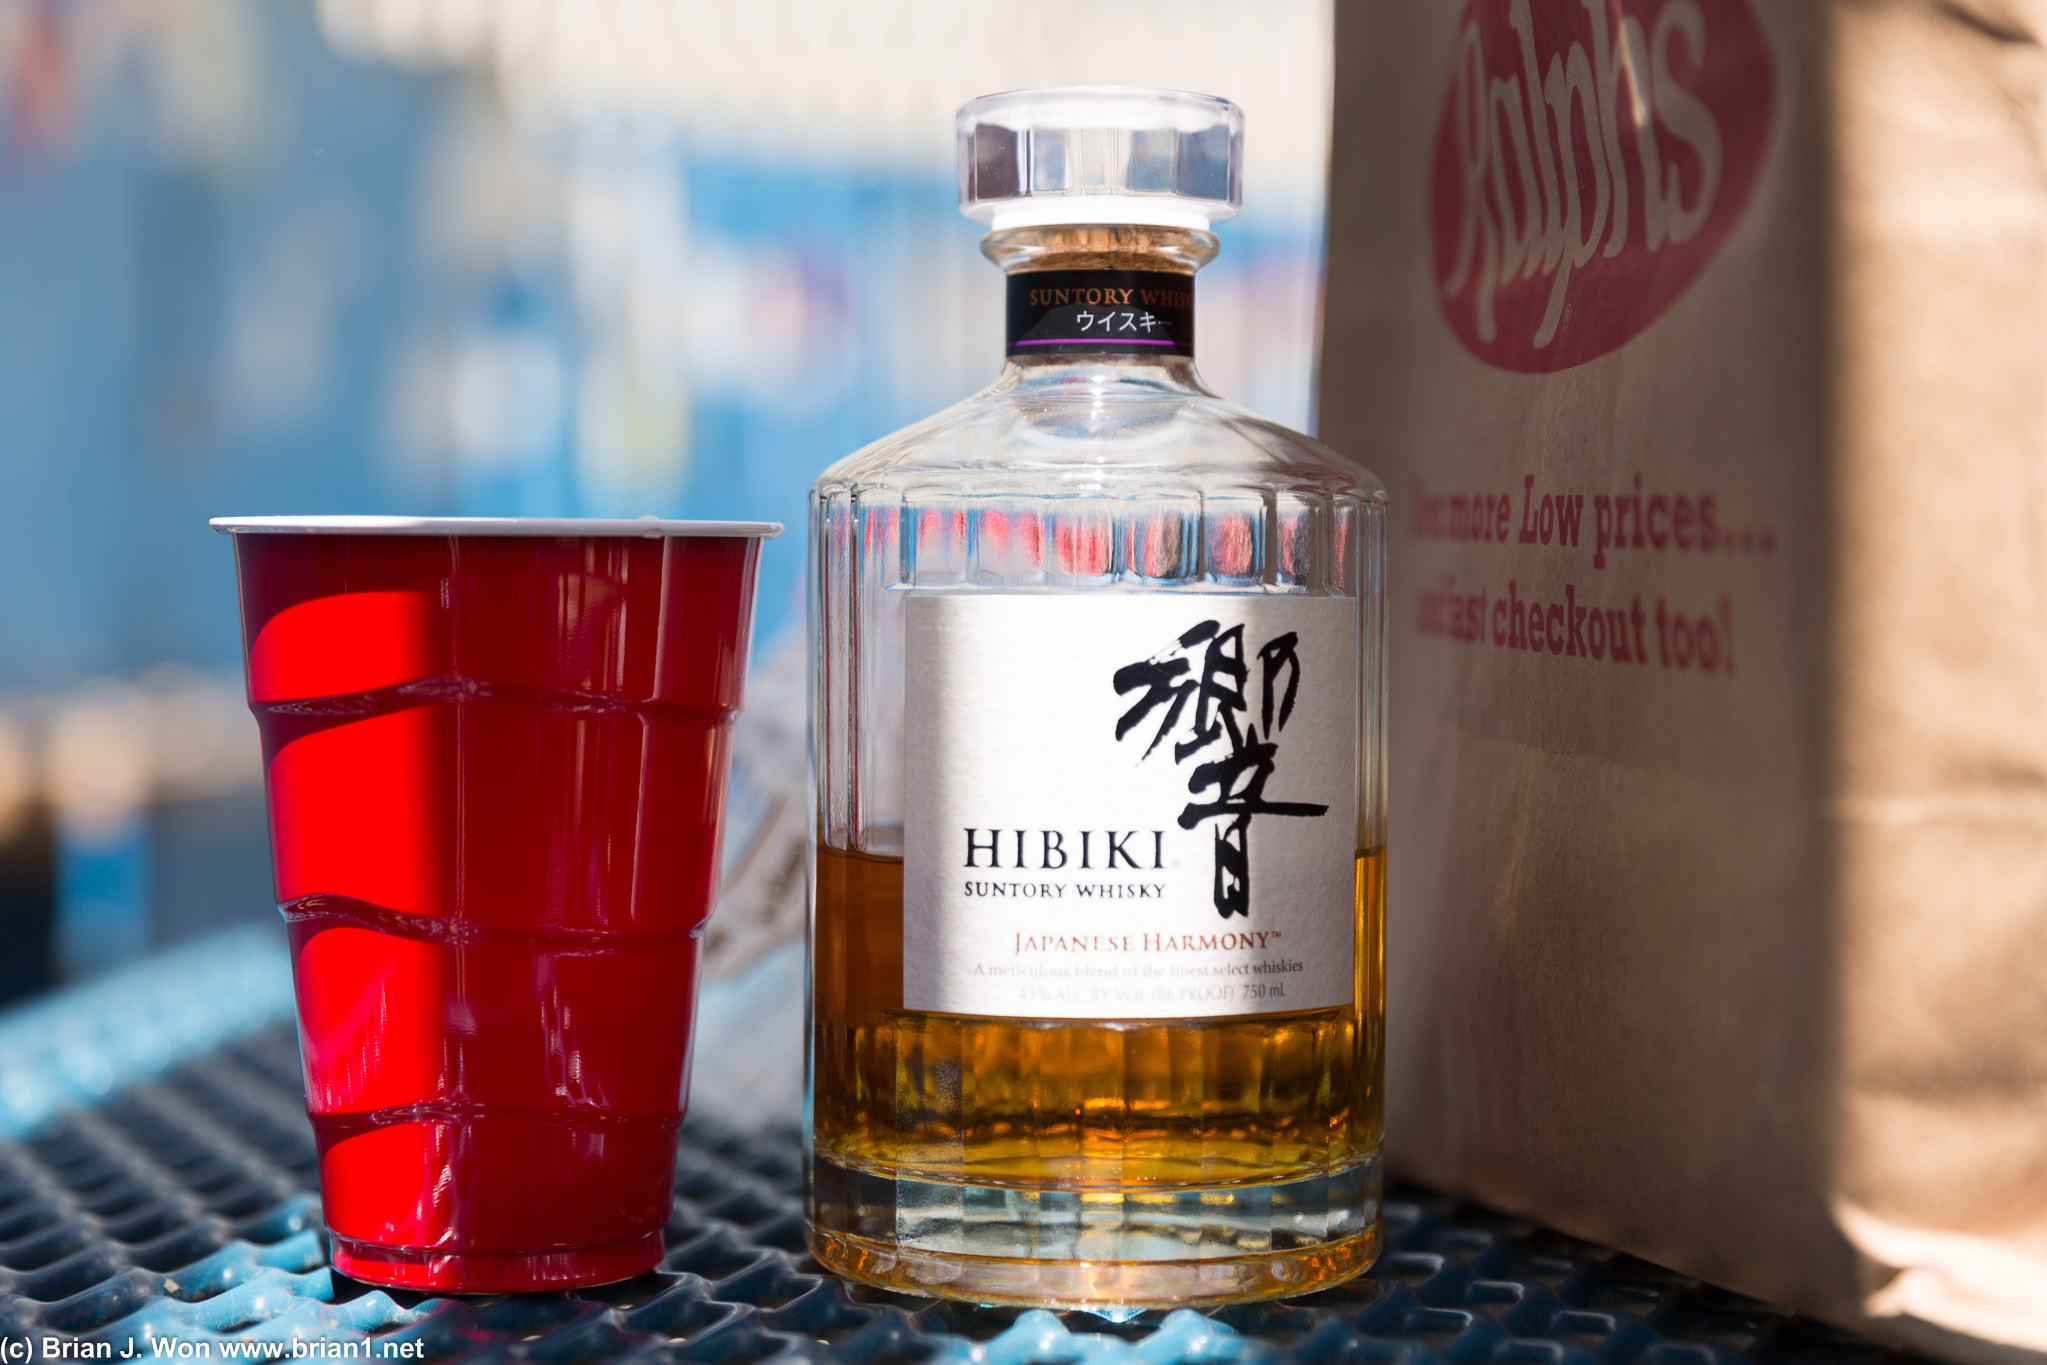 Hibiki Japanese Harmony. In a classy red Solo cup.